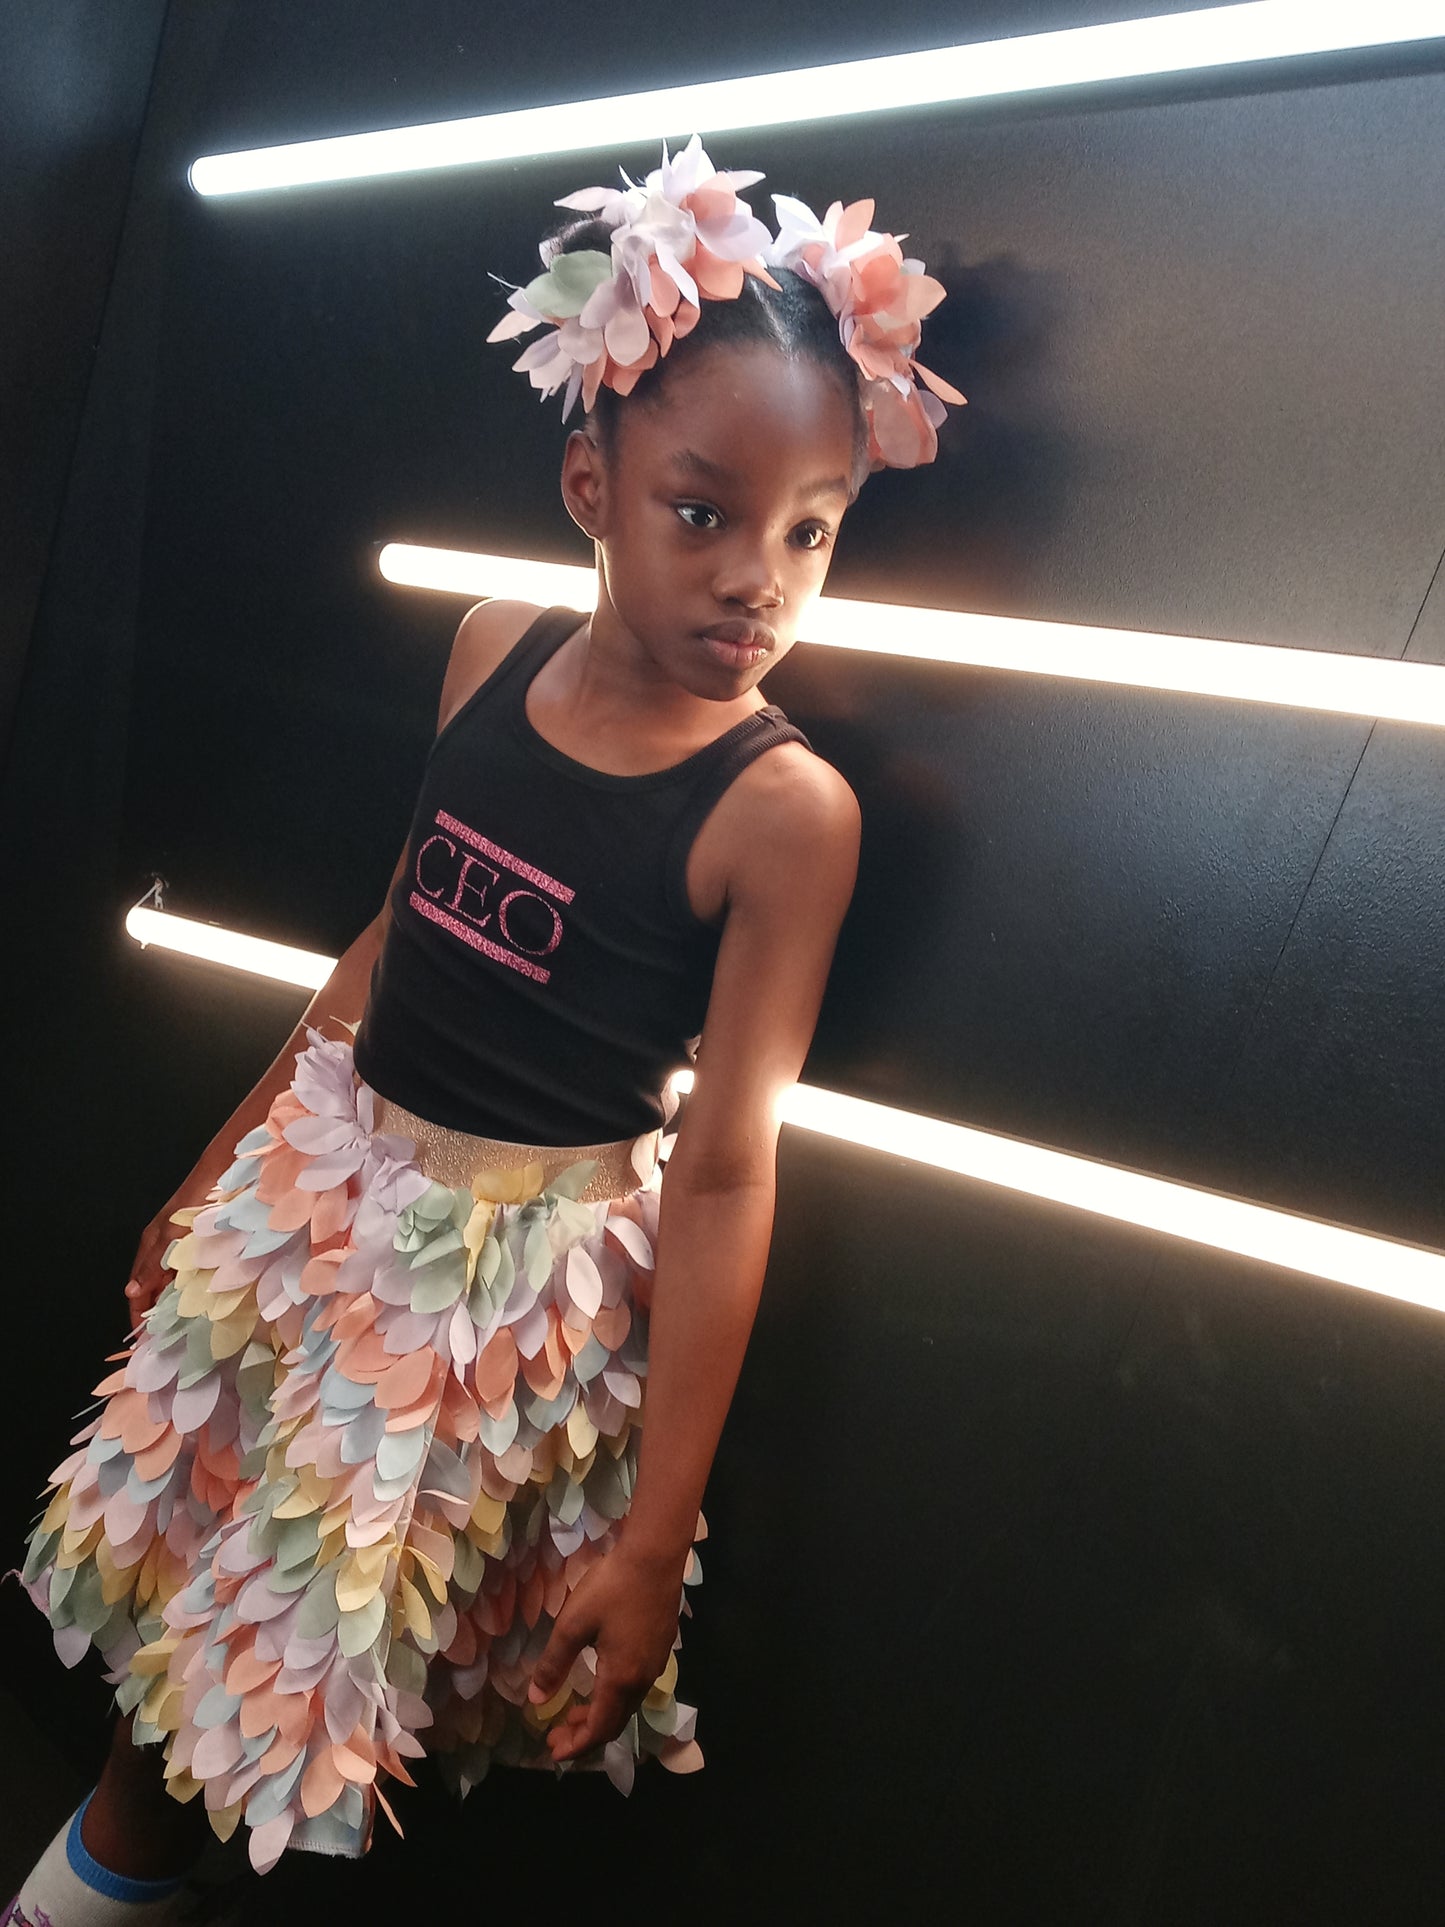 Flowing Petals Specialty Skirt & Matching Scrunchies 📌YOUTH SIZES ONLY